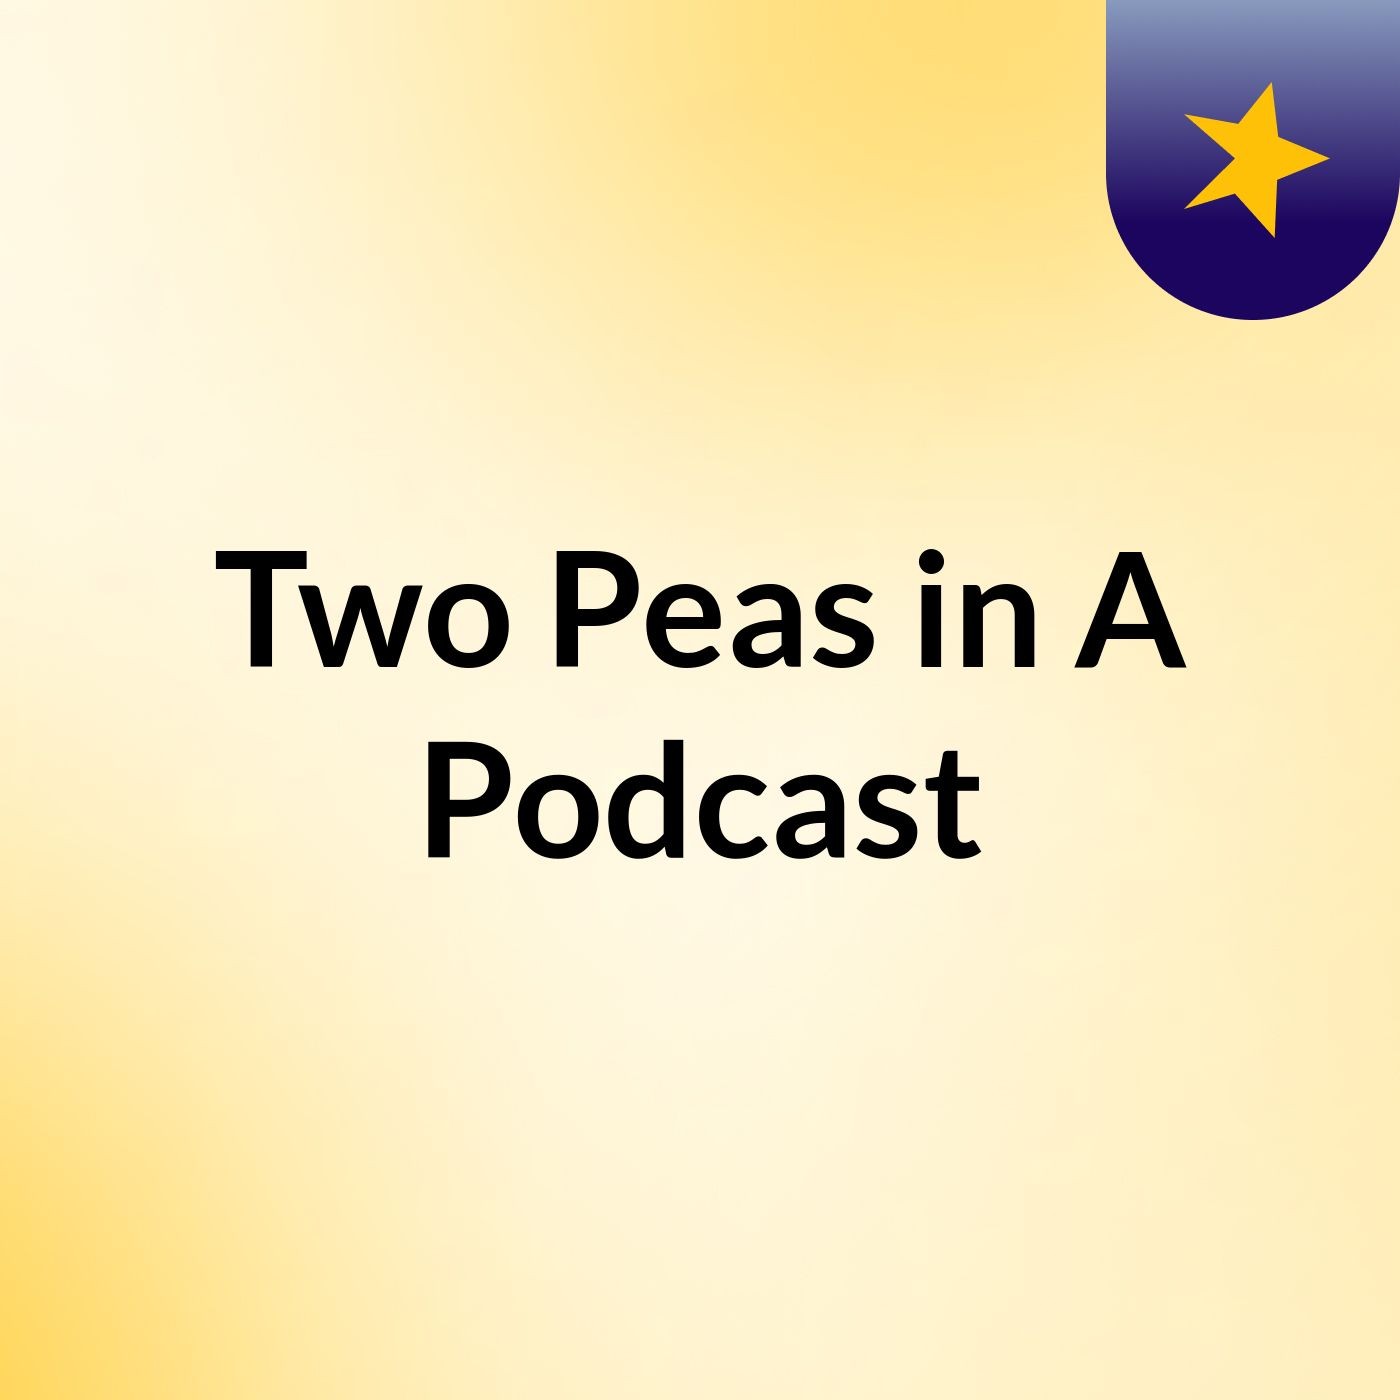 Two Peas in A Podcast